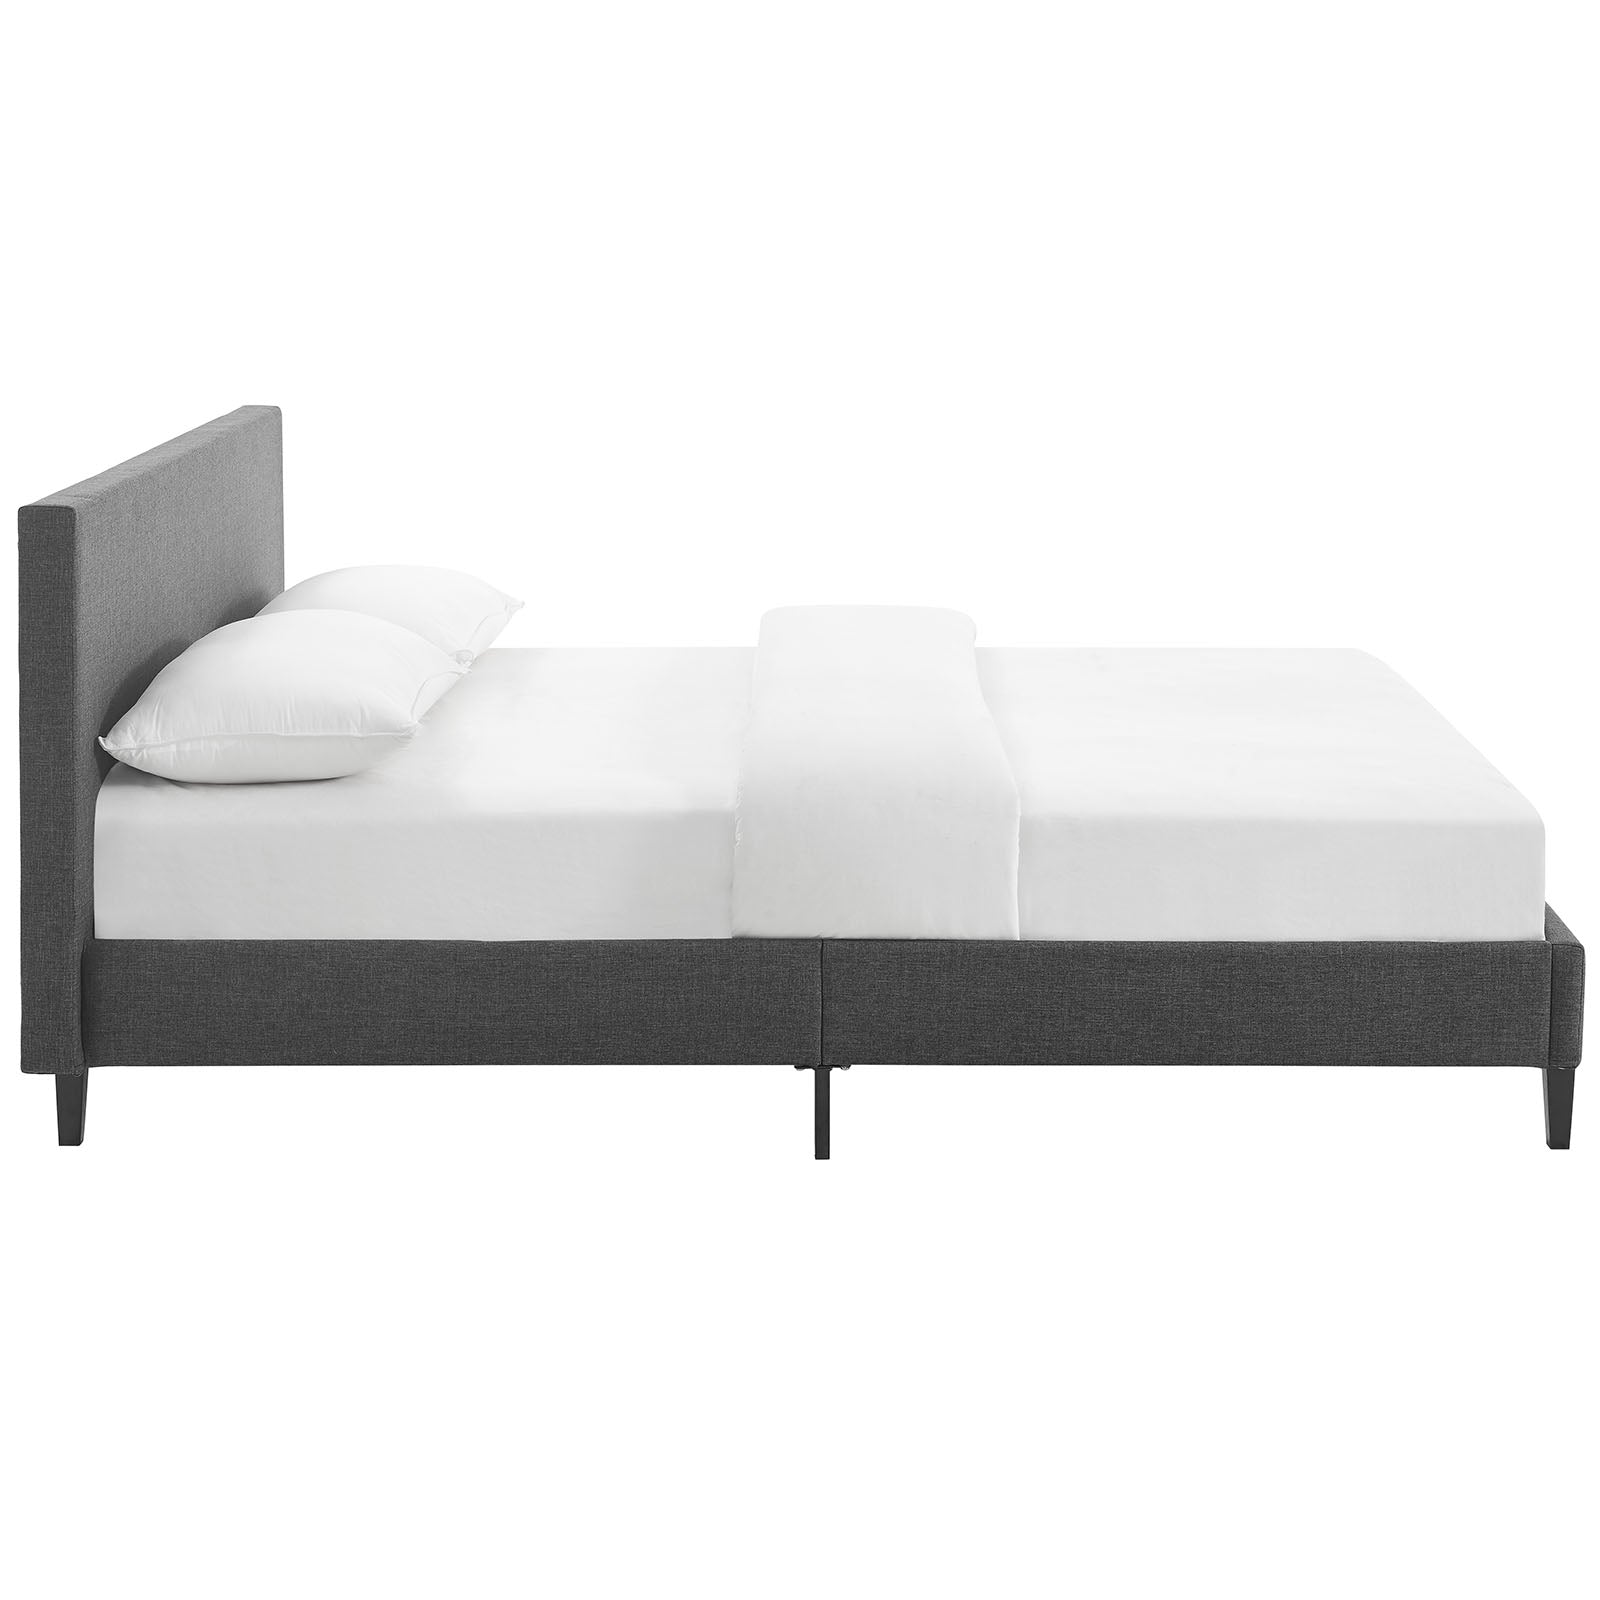 Modway Beds - Anya Queen Bed Gray